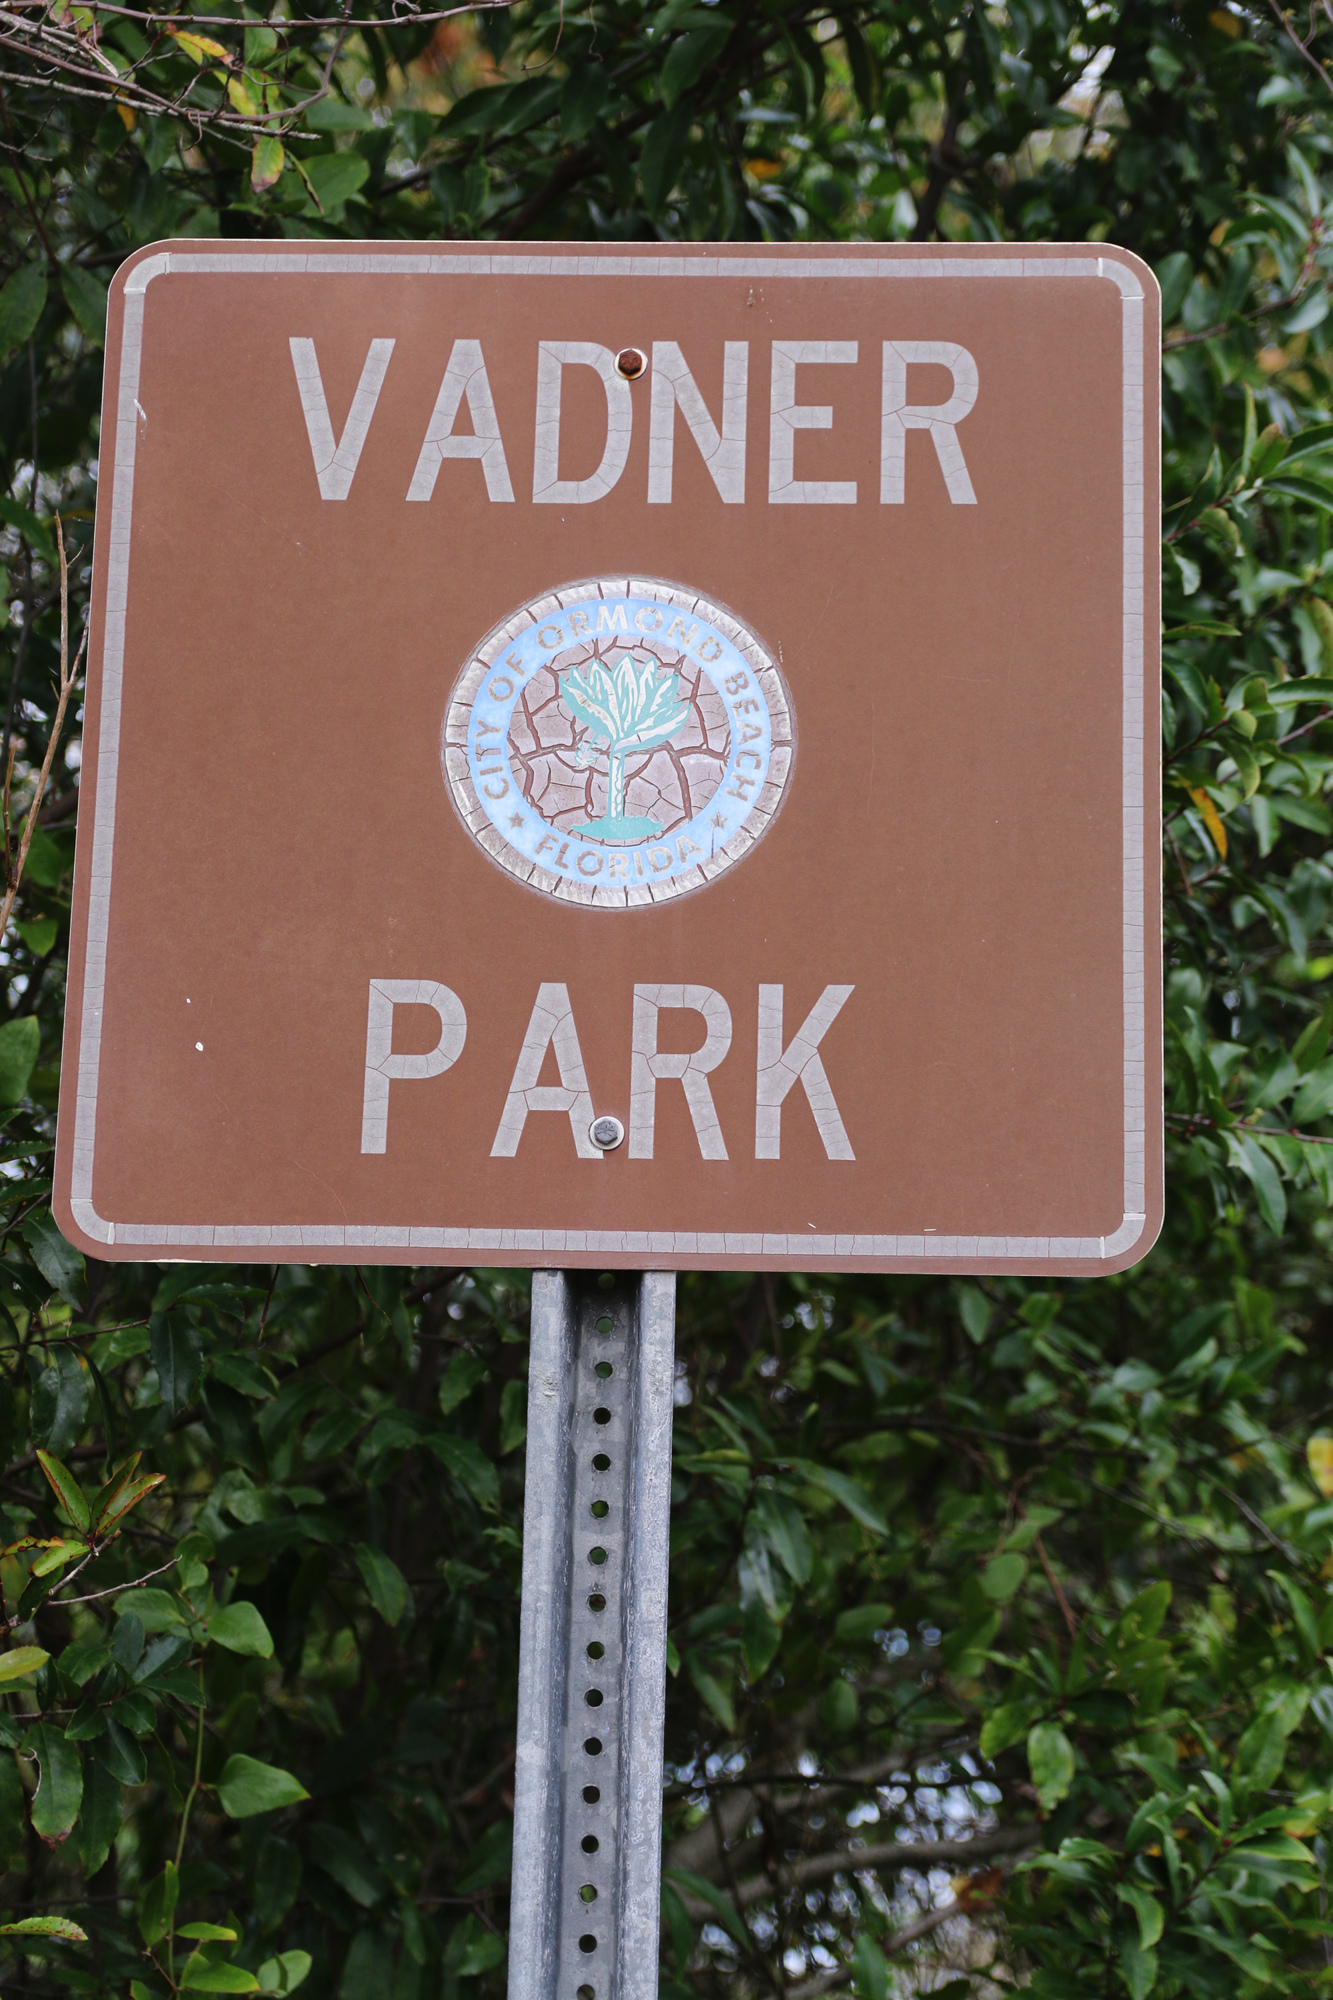 Vadner Park will be an all-native park come 2021. Photo by Jarleene Almenas